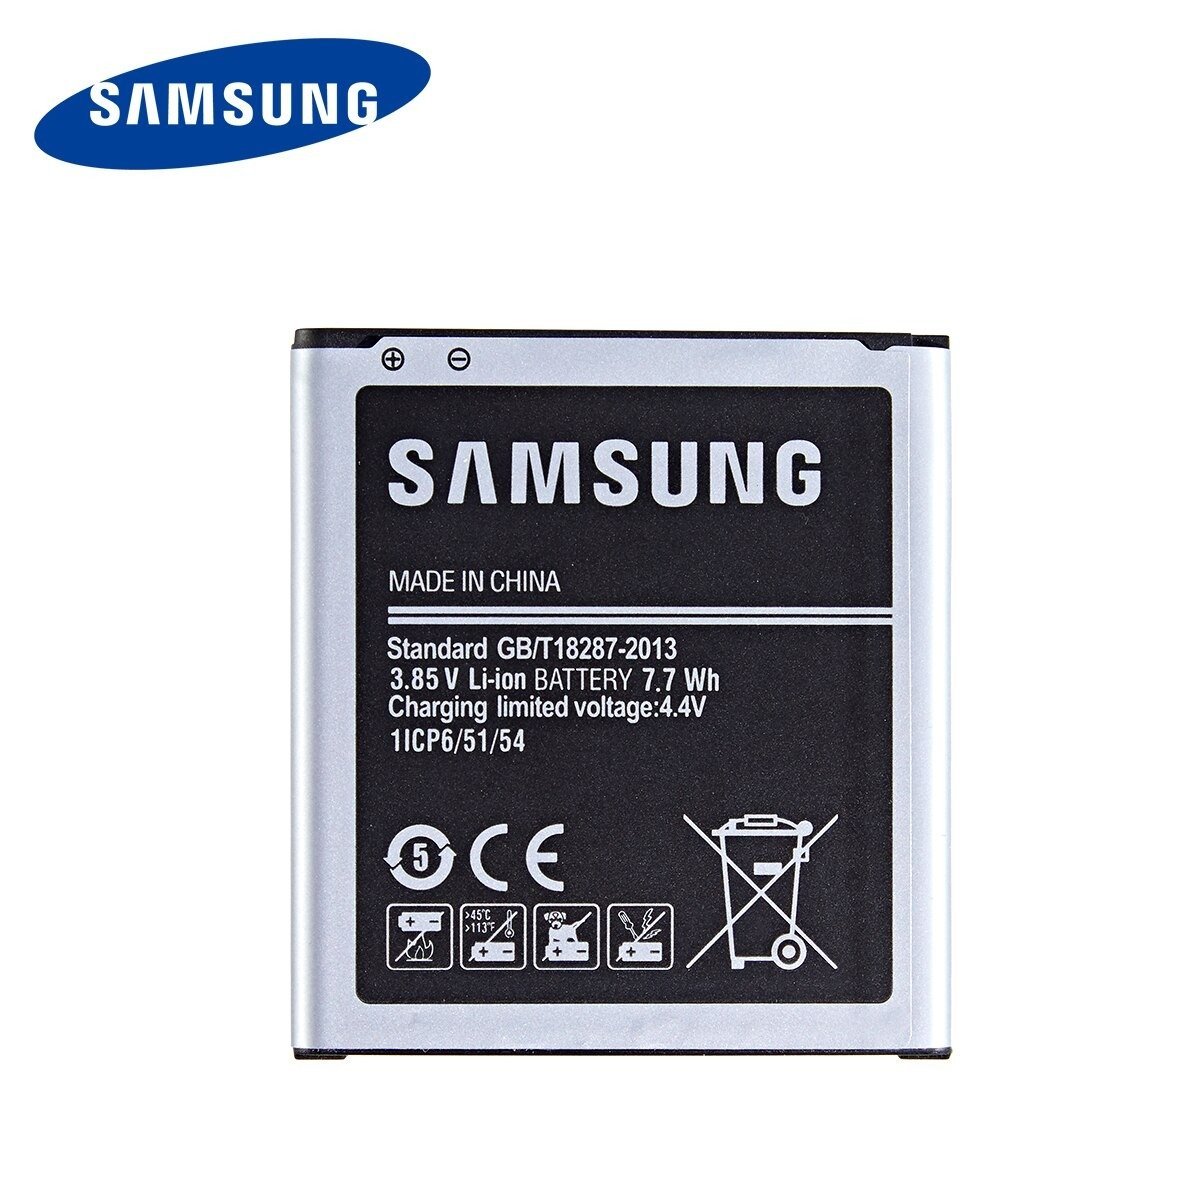 Samsung Galaxy J2 Battery Replacement